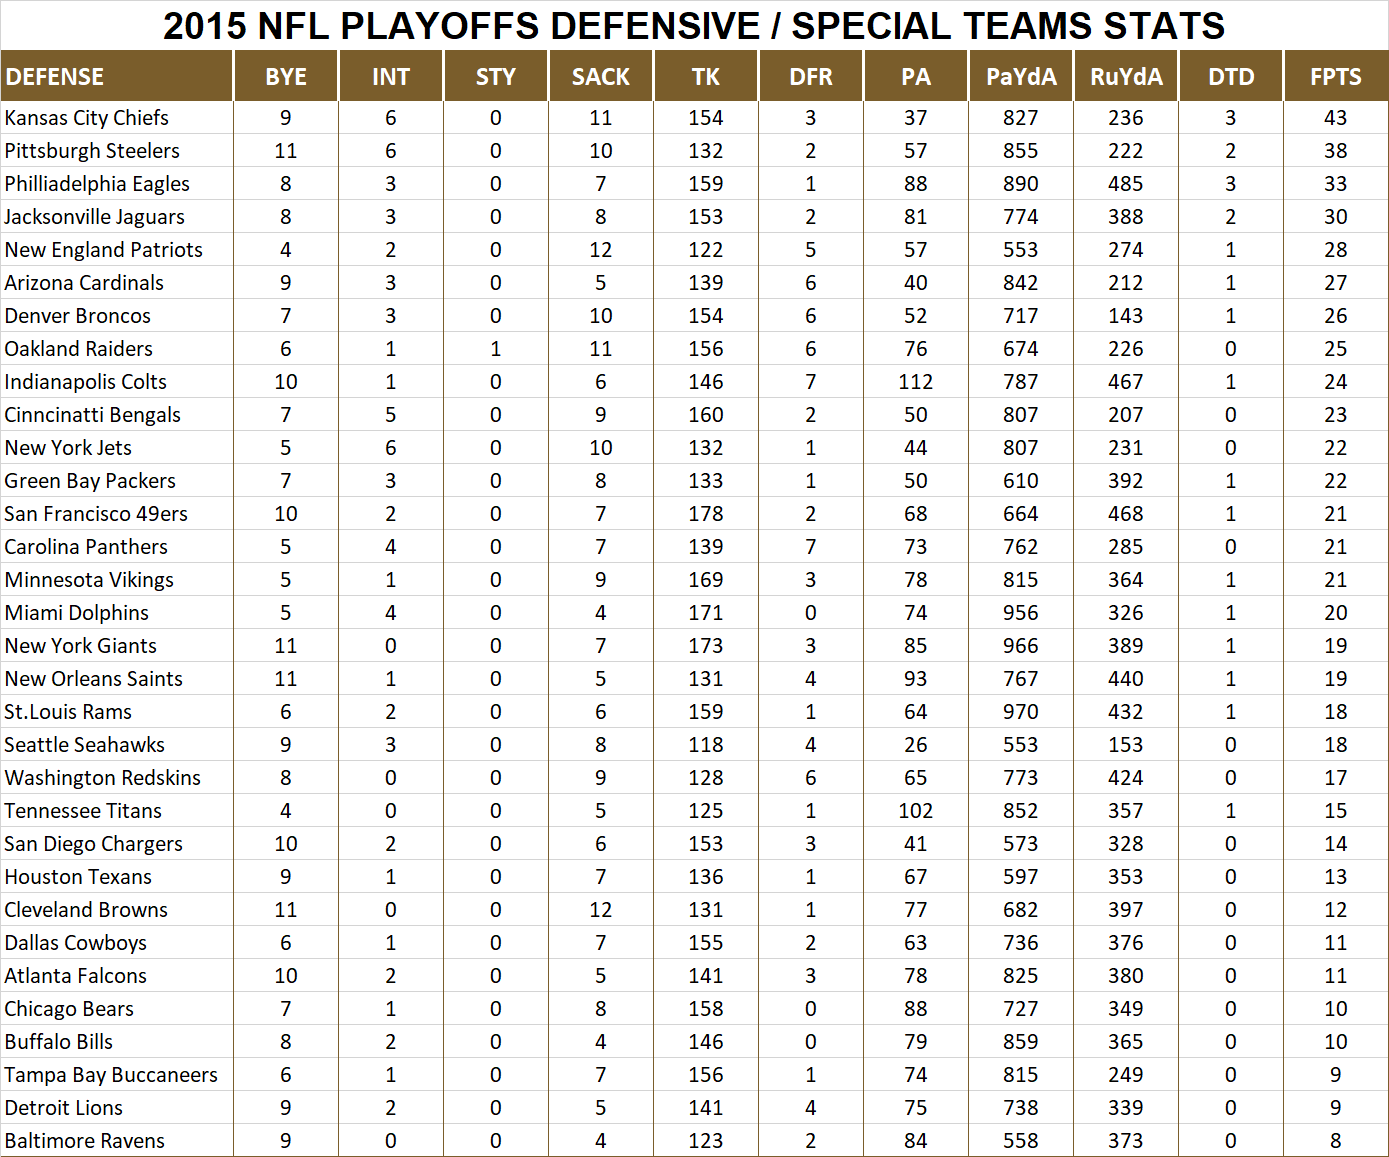 2015 National Football League Pool Playoff Player Defensive Stats